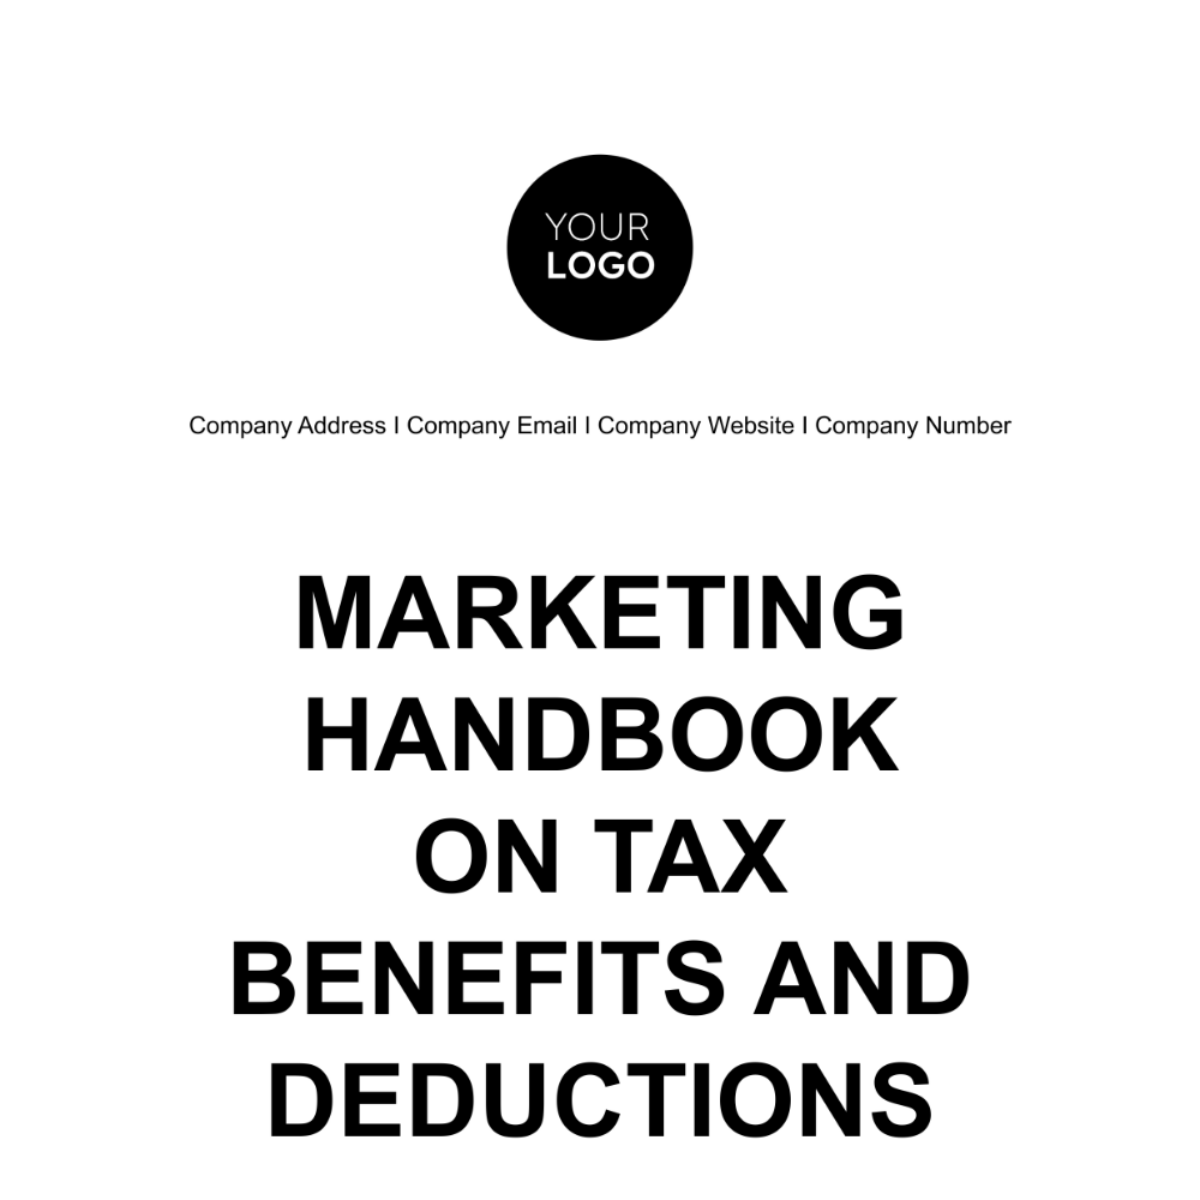 Free Marketing Handbook on Tax Benefits and Deductions Template